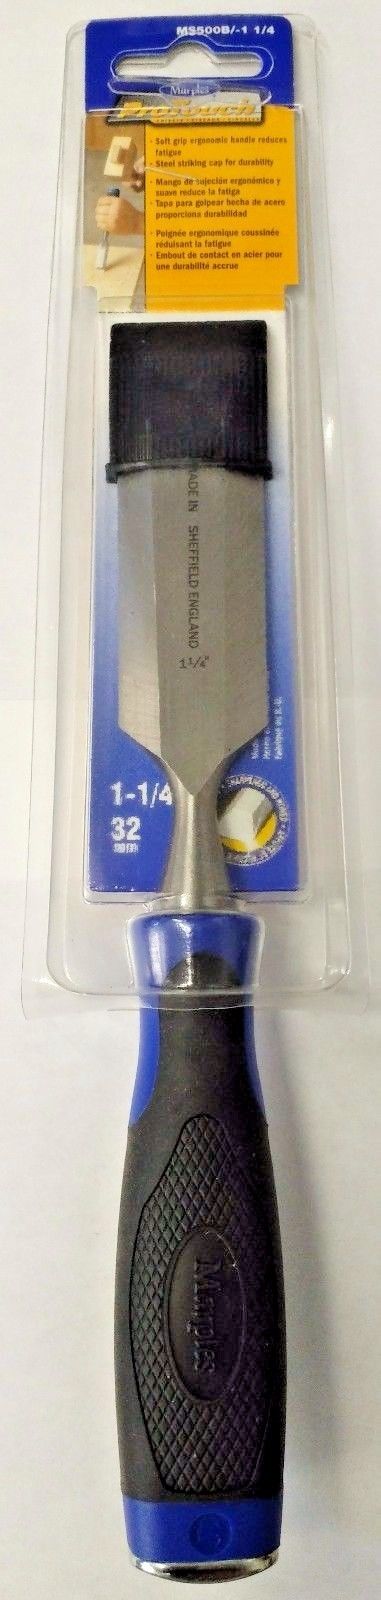 Irwin Marples MS500B/1-1/4" Pro Touch Chisel With Striking Cap England